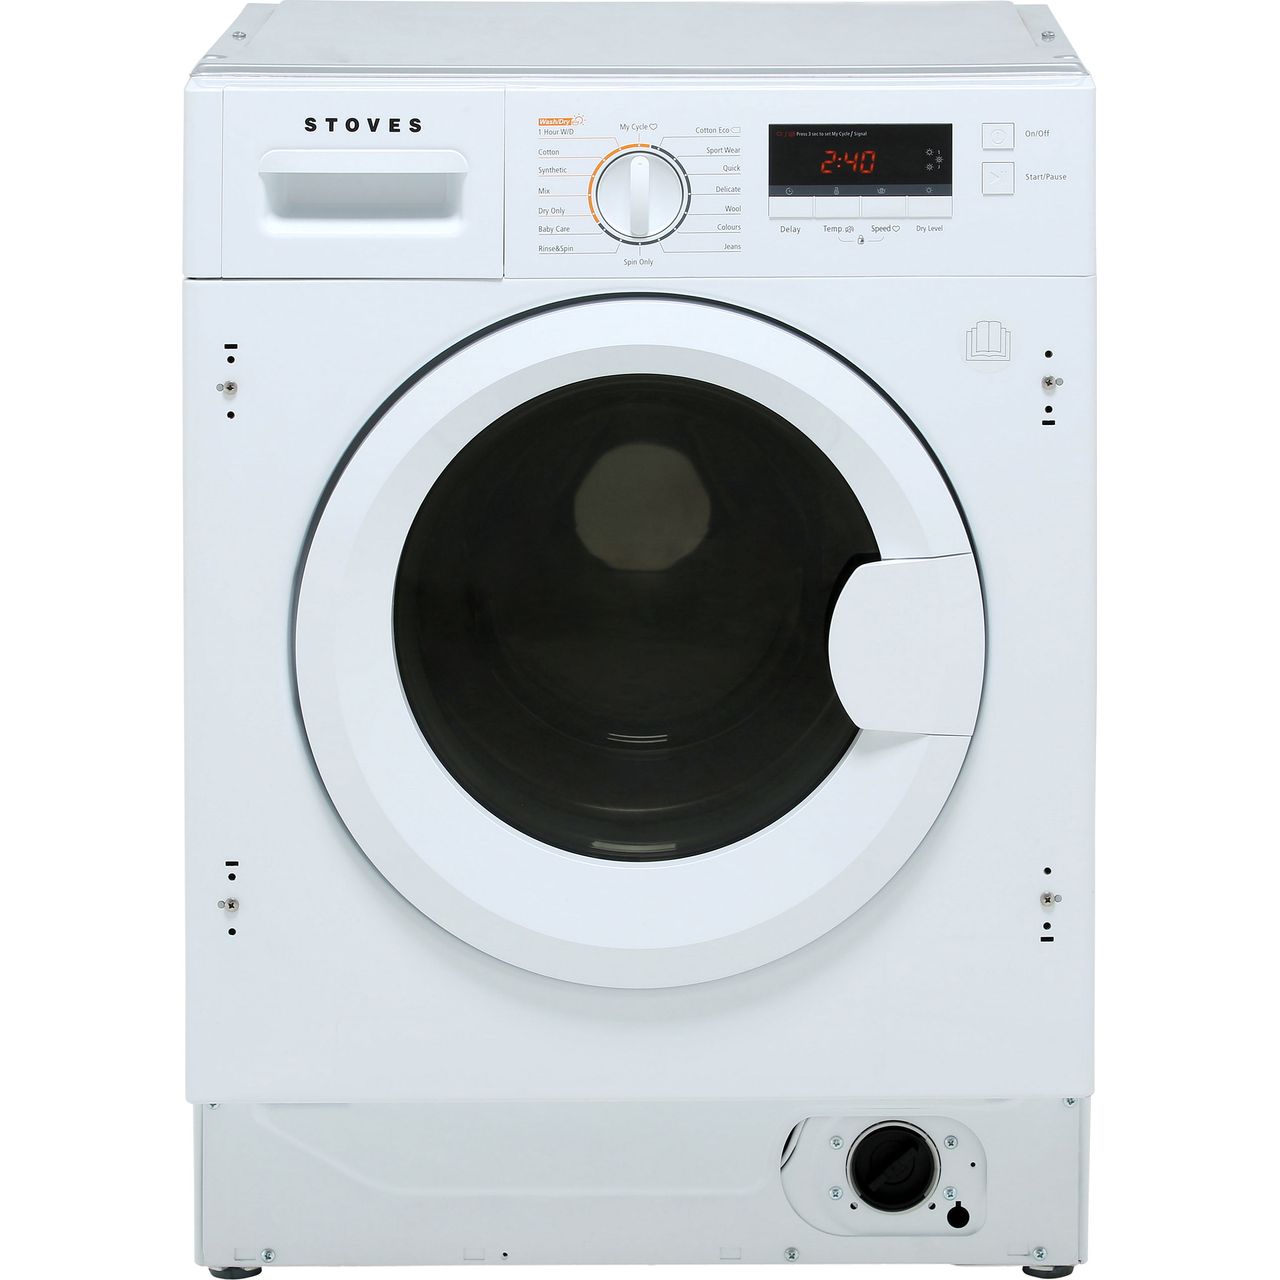 Stoves IWD8614 Integrated 8Kg / 6Kg Washer Dryer with 1400 rpm Review